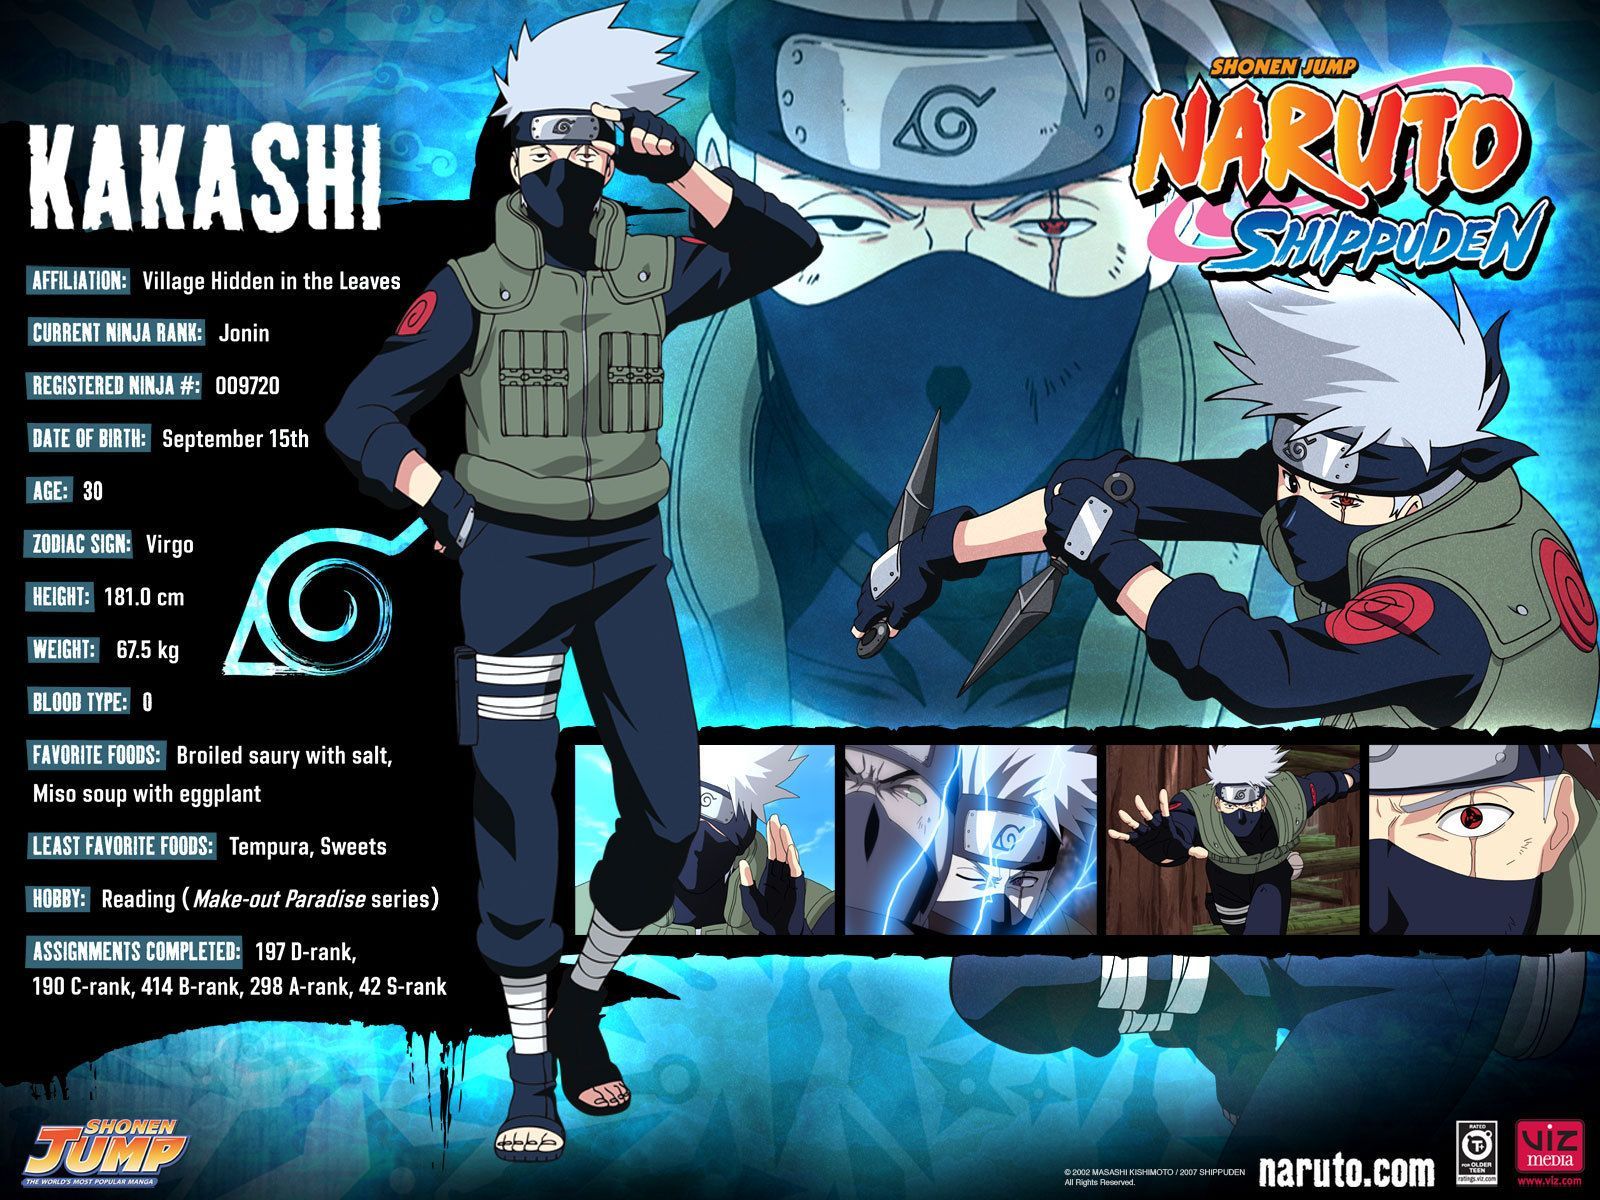 Naruto Shippuden wallpapers HD Wallpapers, Backgrounds, Images